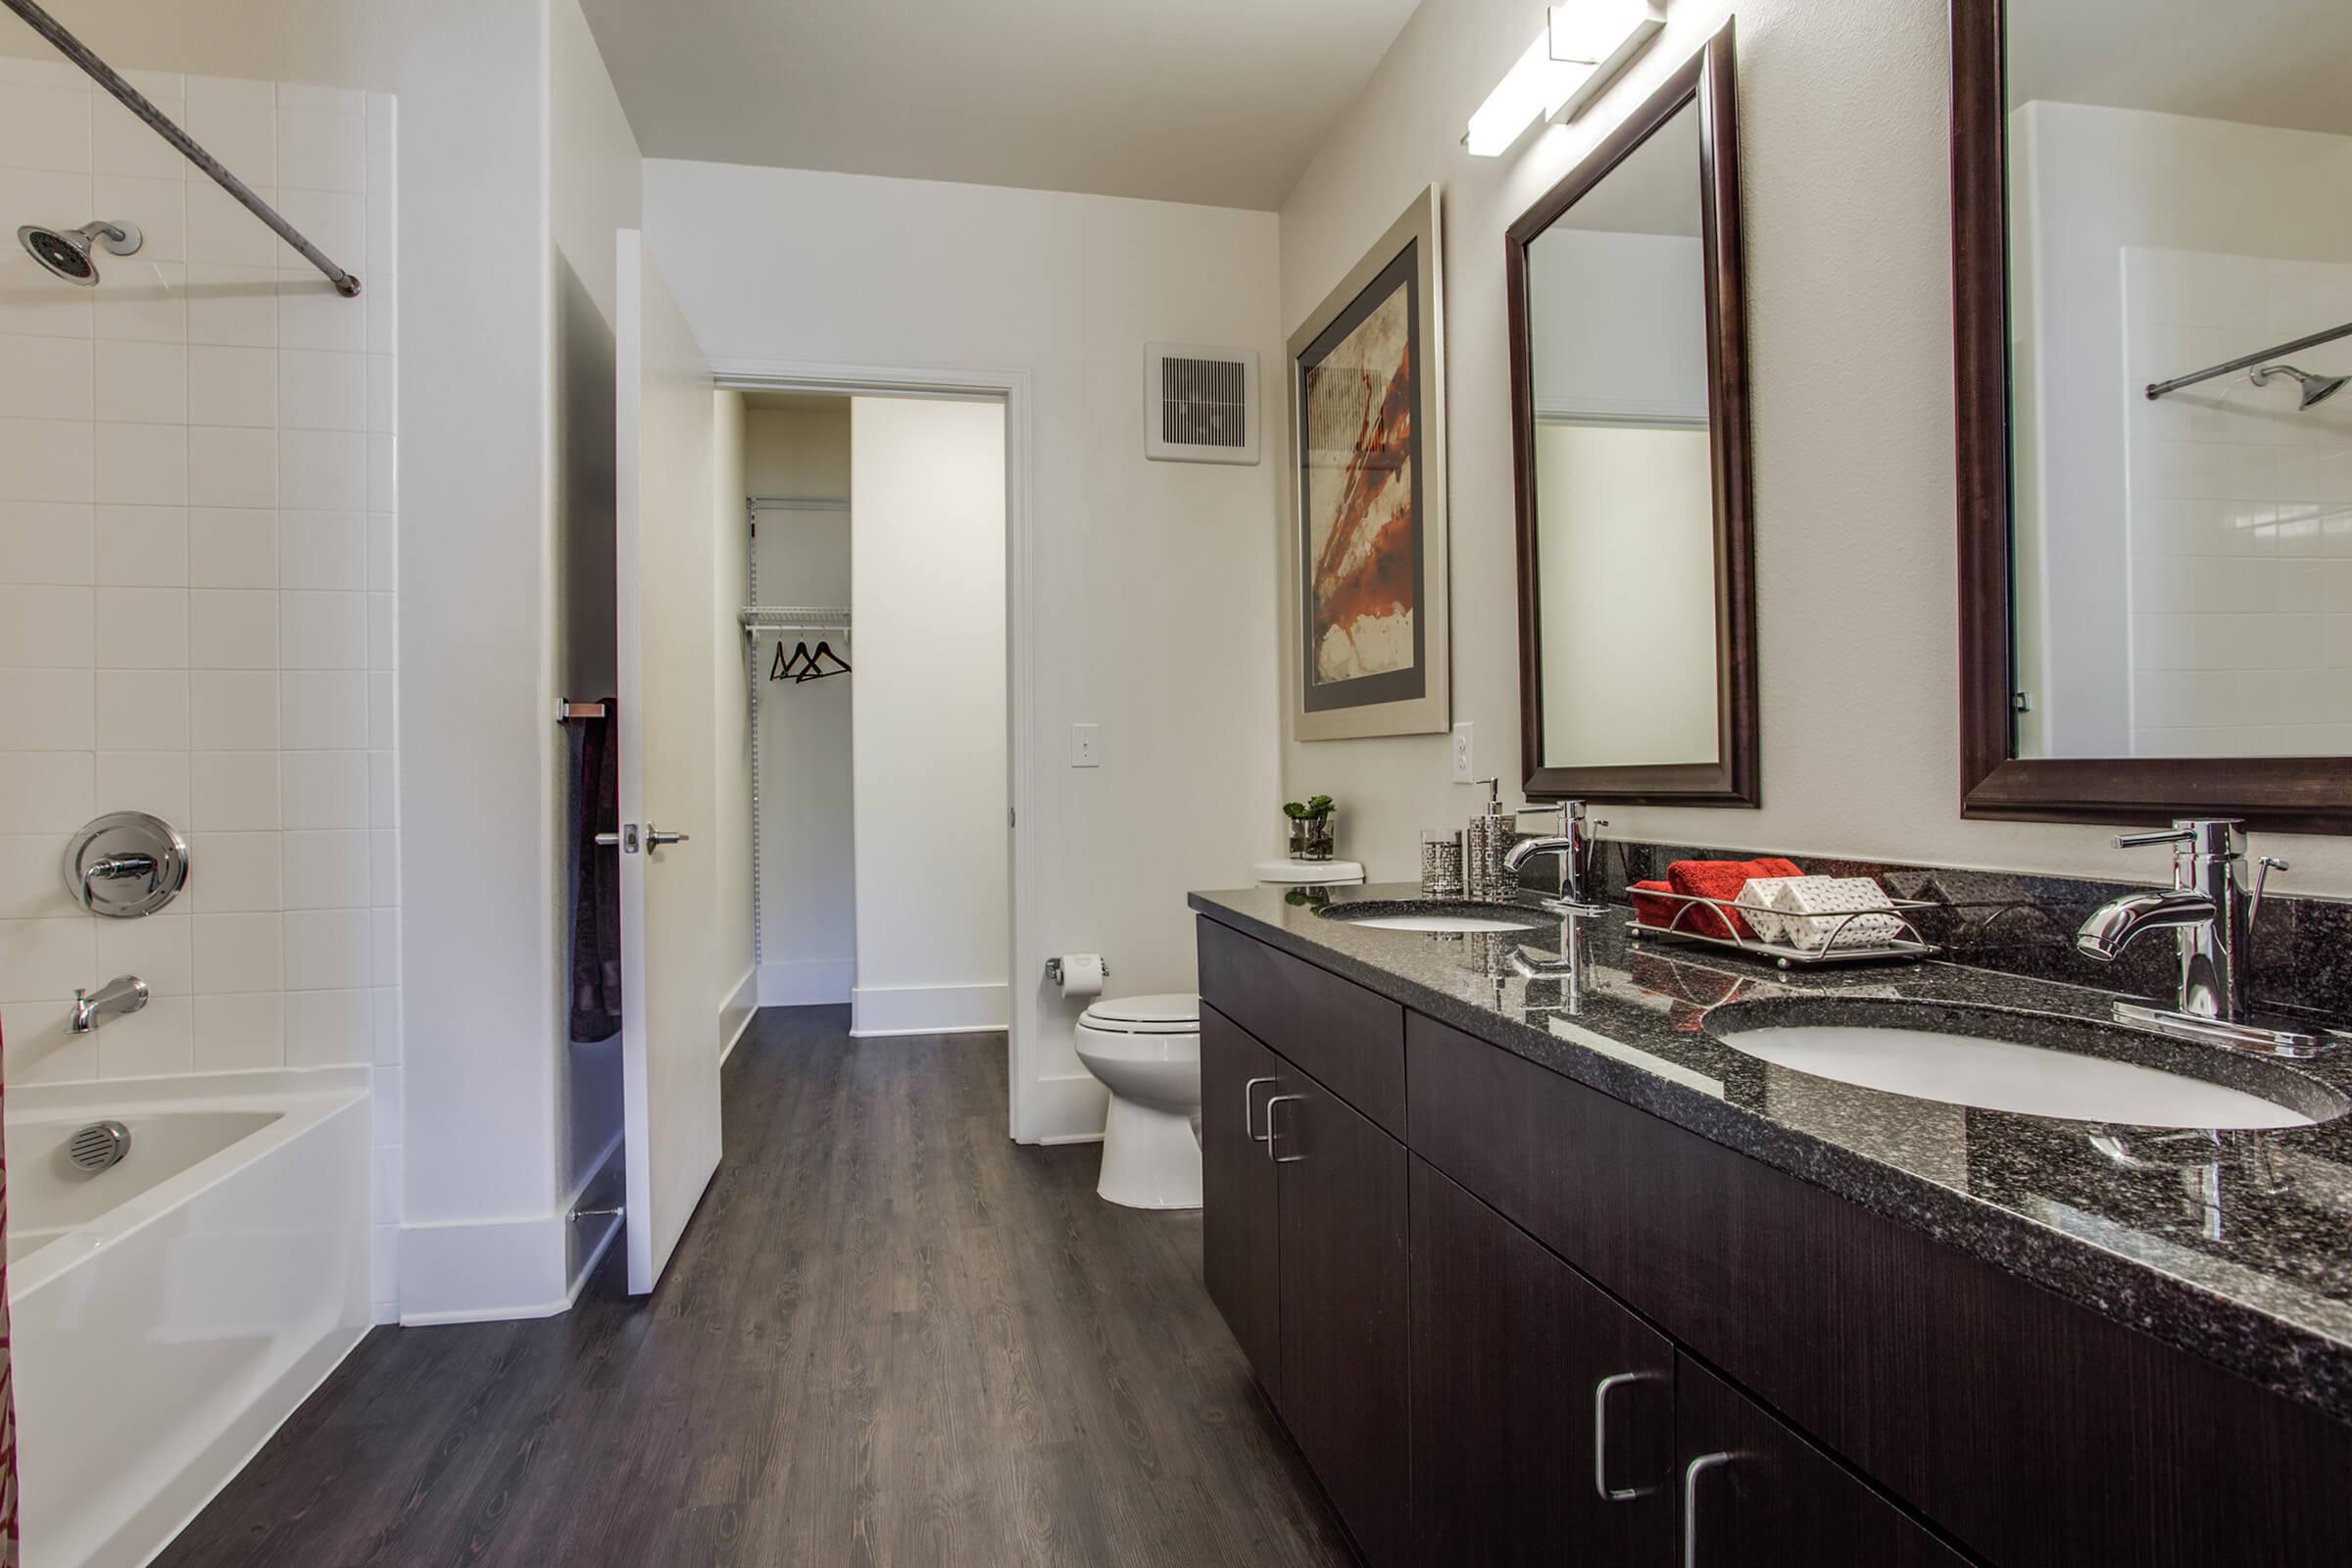 furnished bathroom with wooden floors